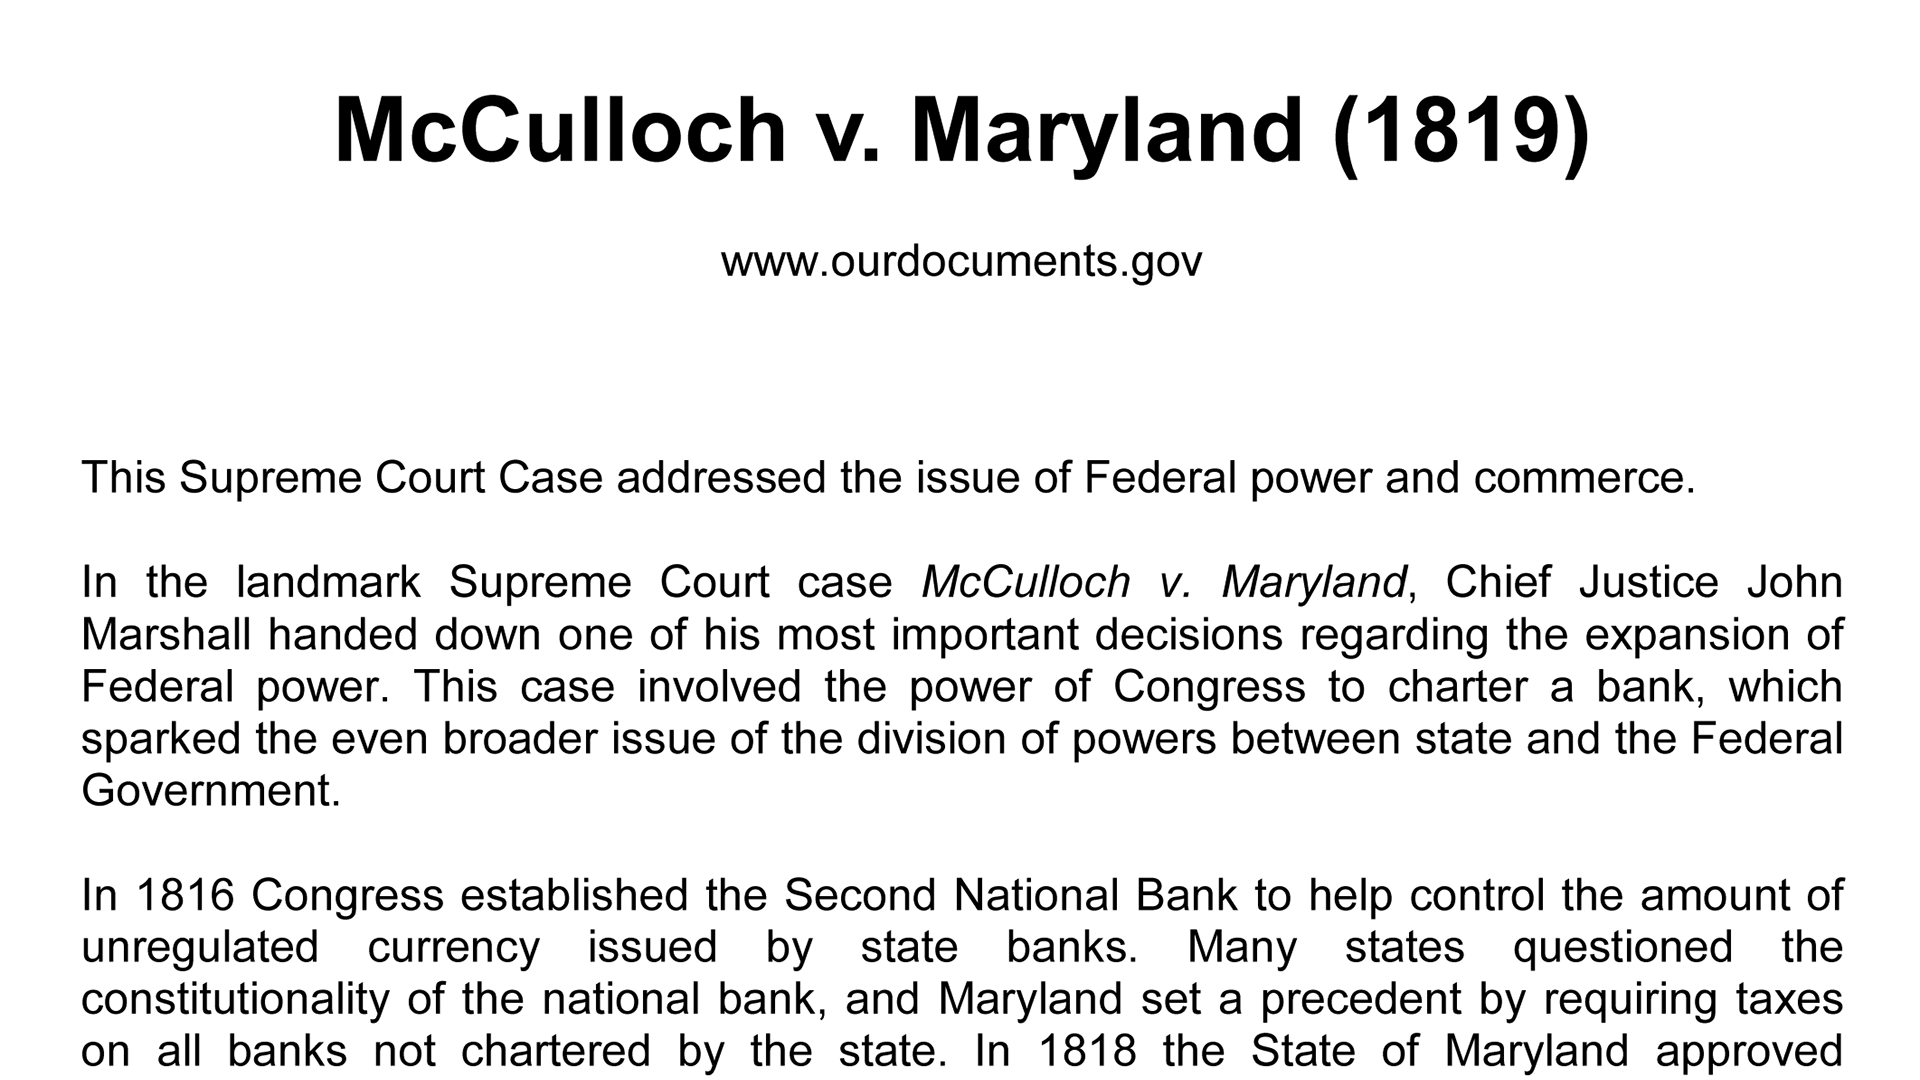 mcculloch-v-maryland-1819-and-resource-materials-pbs-learningmedia